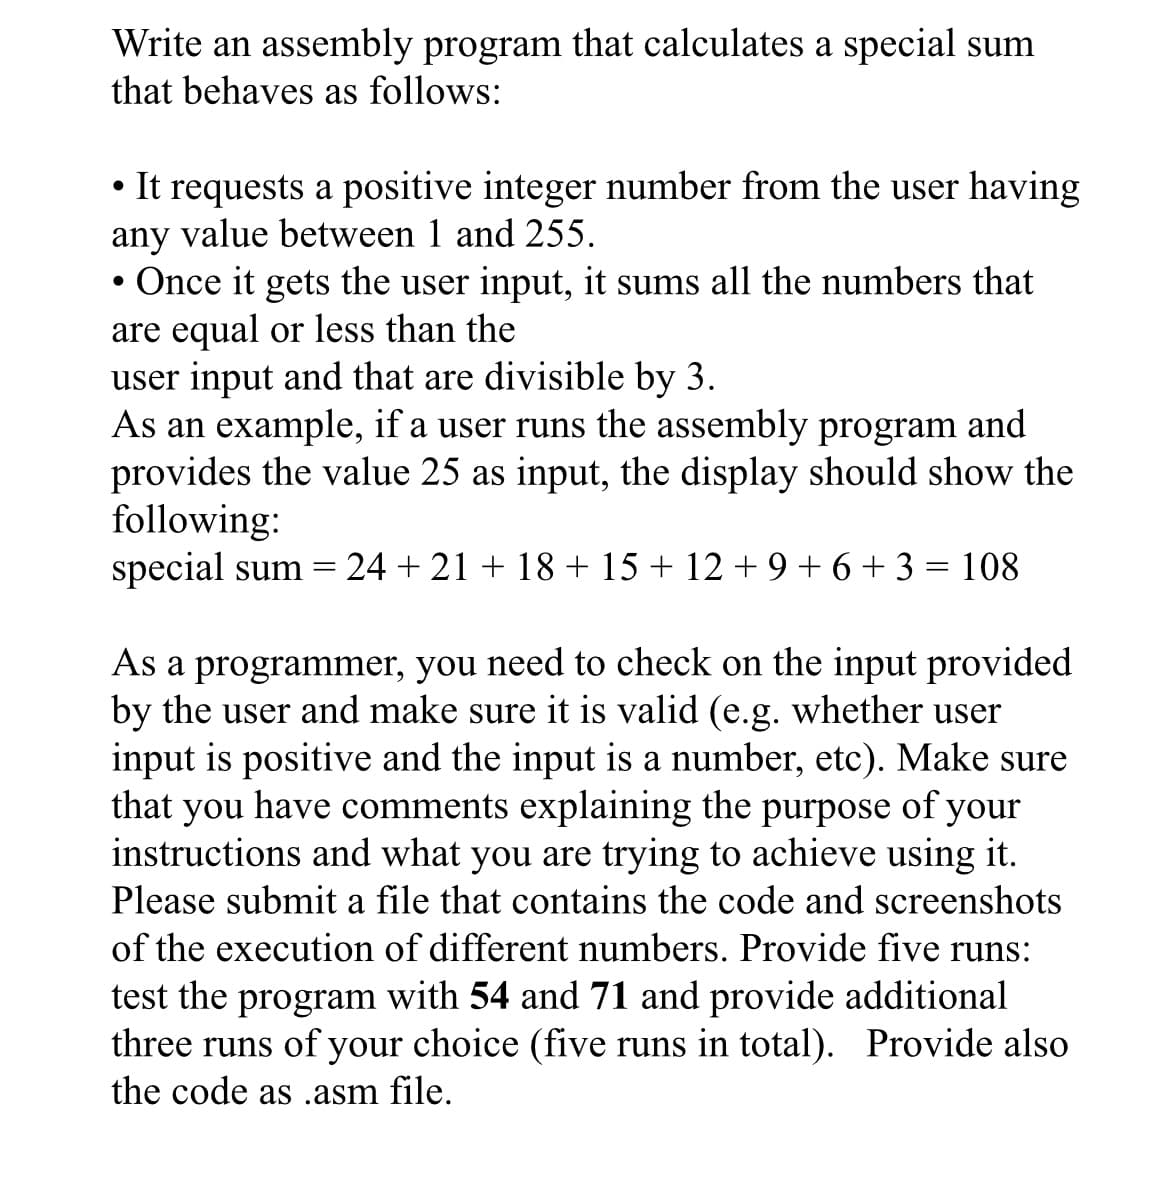 Write an assembly program that calculates a special sum
that behaves as follows:
It requests a positive integer number from the user having
any value between 1 and 255.
Once it gets the user input, it sums all the numbers that
are equal or less than the
user input and that are divisible by 3.
As an example, if a user runs the assembly program and
provides the value 25 as input, the display should show the
following:
special sum =
24 + 21 + 18 + 15 + 12 + 9 + 6+ 3 = 108
As a programmer, you need to check on the input provided
by the user and make sure it is valid (e.g. whether user
input is positive and the input is a number, etc). Make sure
that you have comments explaining the purpose of your
instructions and what you are trying to achieve using it.
Please submit a file that contains the code and screenshots
of the execution of different numbers. Provide five runs:
test the program with 54 and 71 and provide additional
three runs of your choice (five runs in total). Provide also
the code as .asm file.
